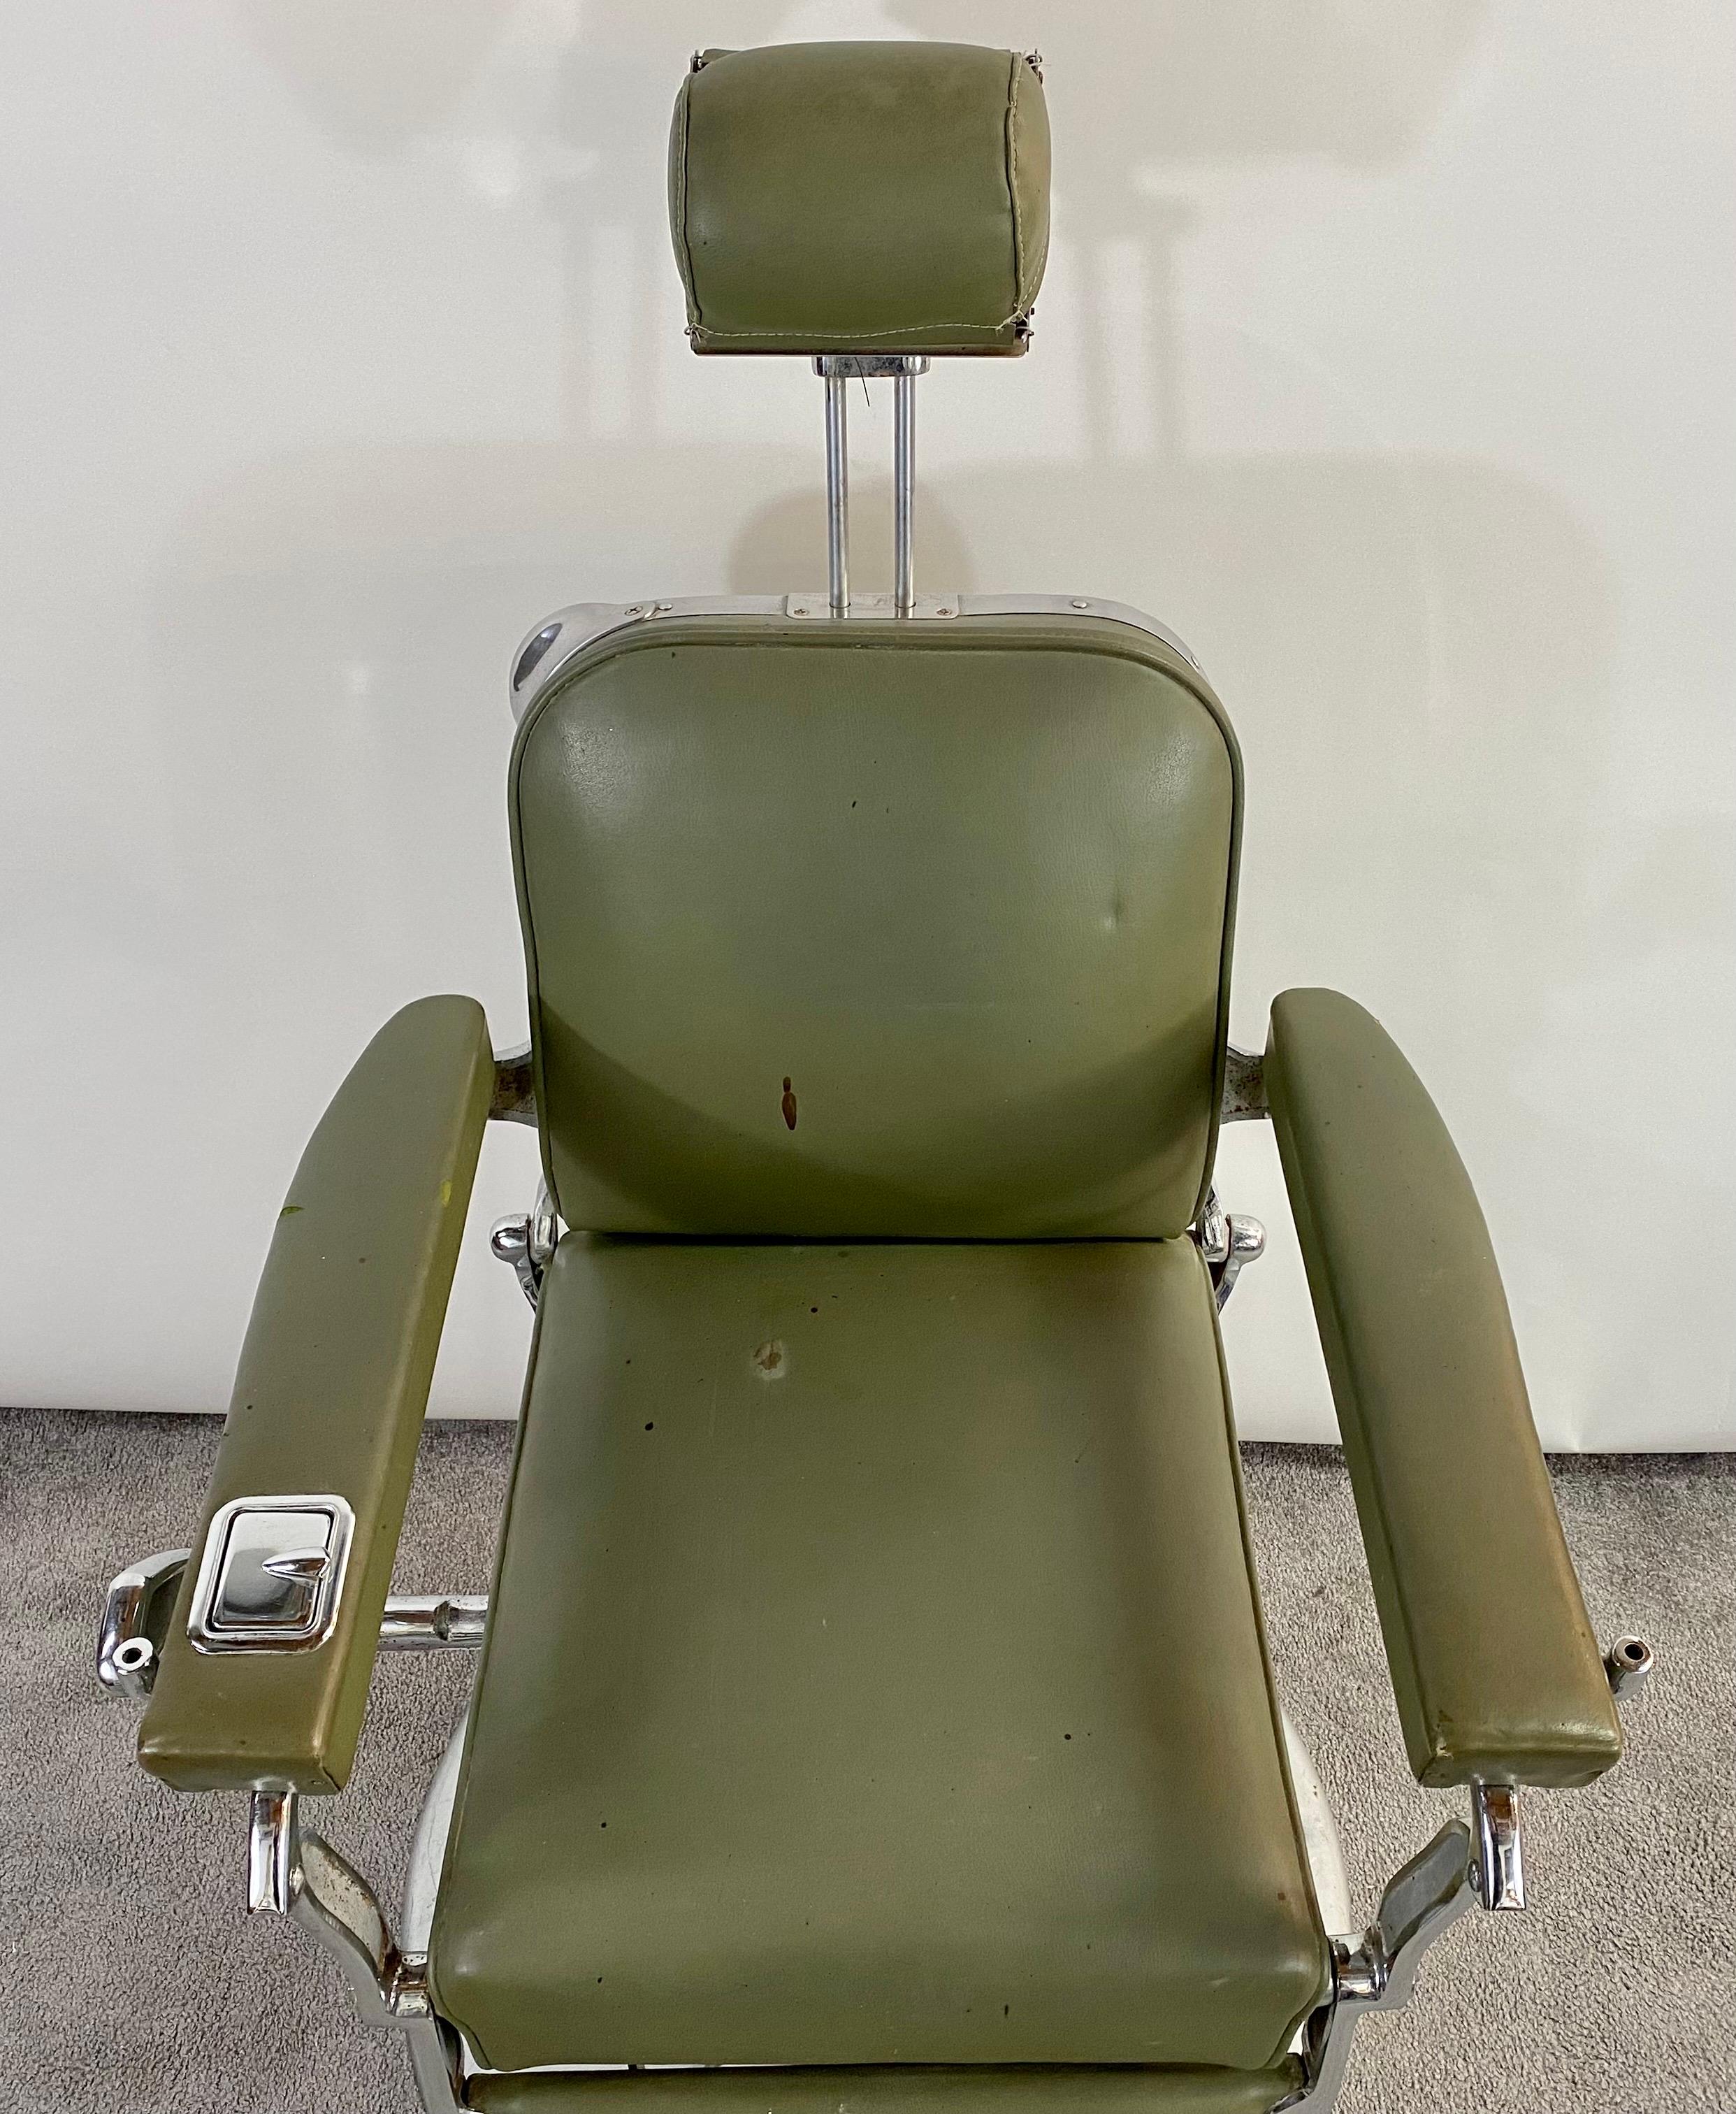 A vintage Art Deco 1930's Koken Barber chair in green leather with head rest. This chair is an exceptional collector item. The chair is made by Koken manufacturing & Co of St Louis, Missouri and ithe foot plate 